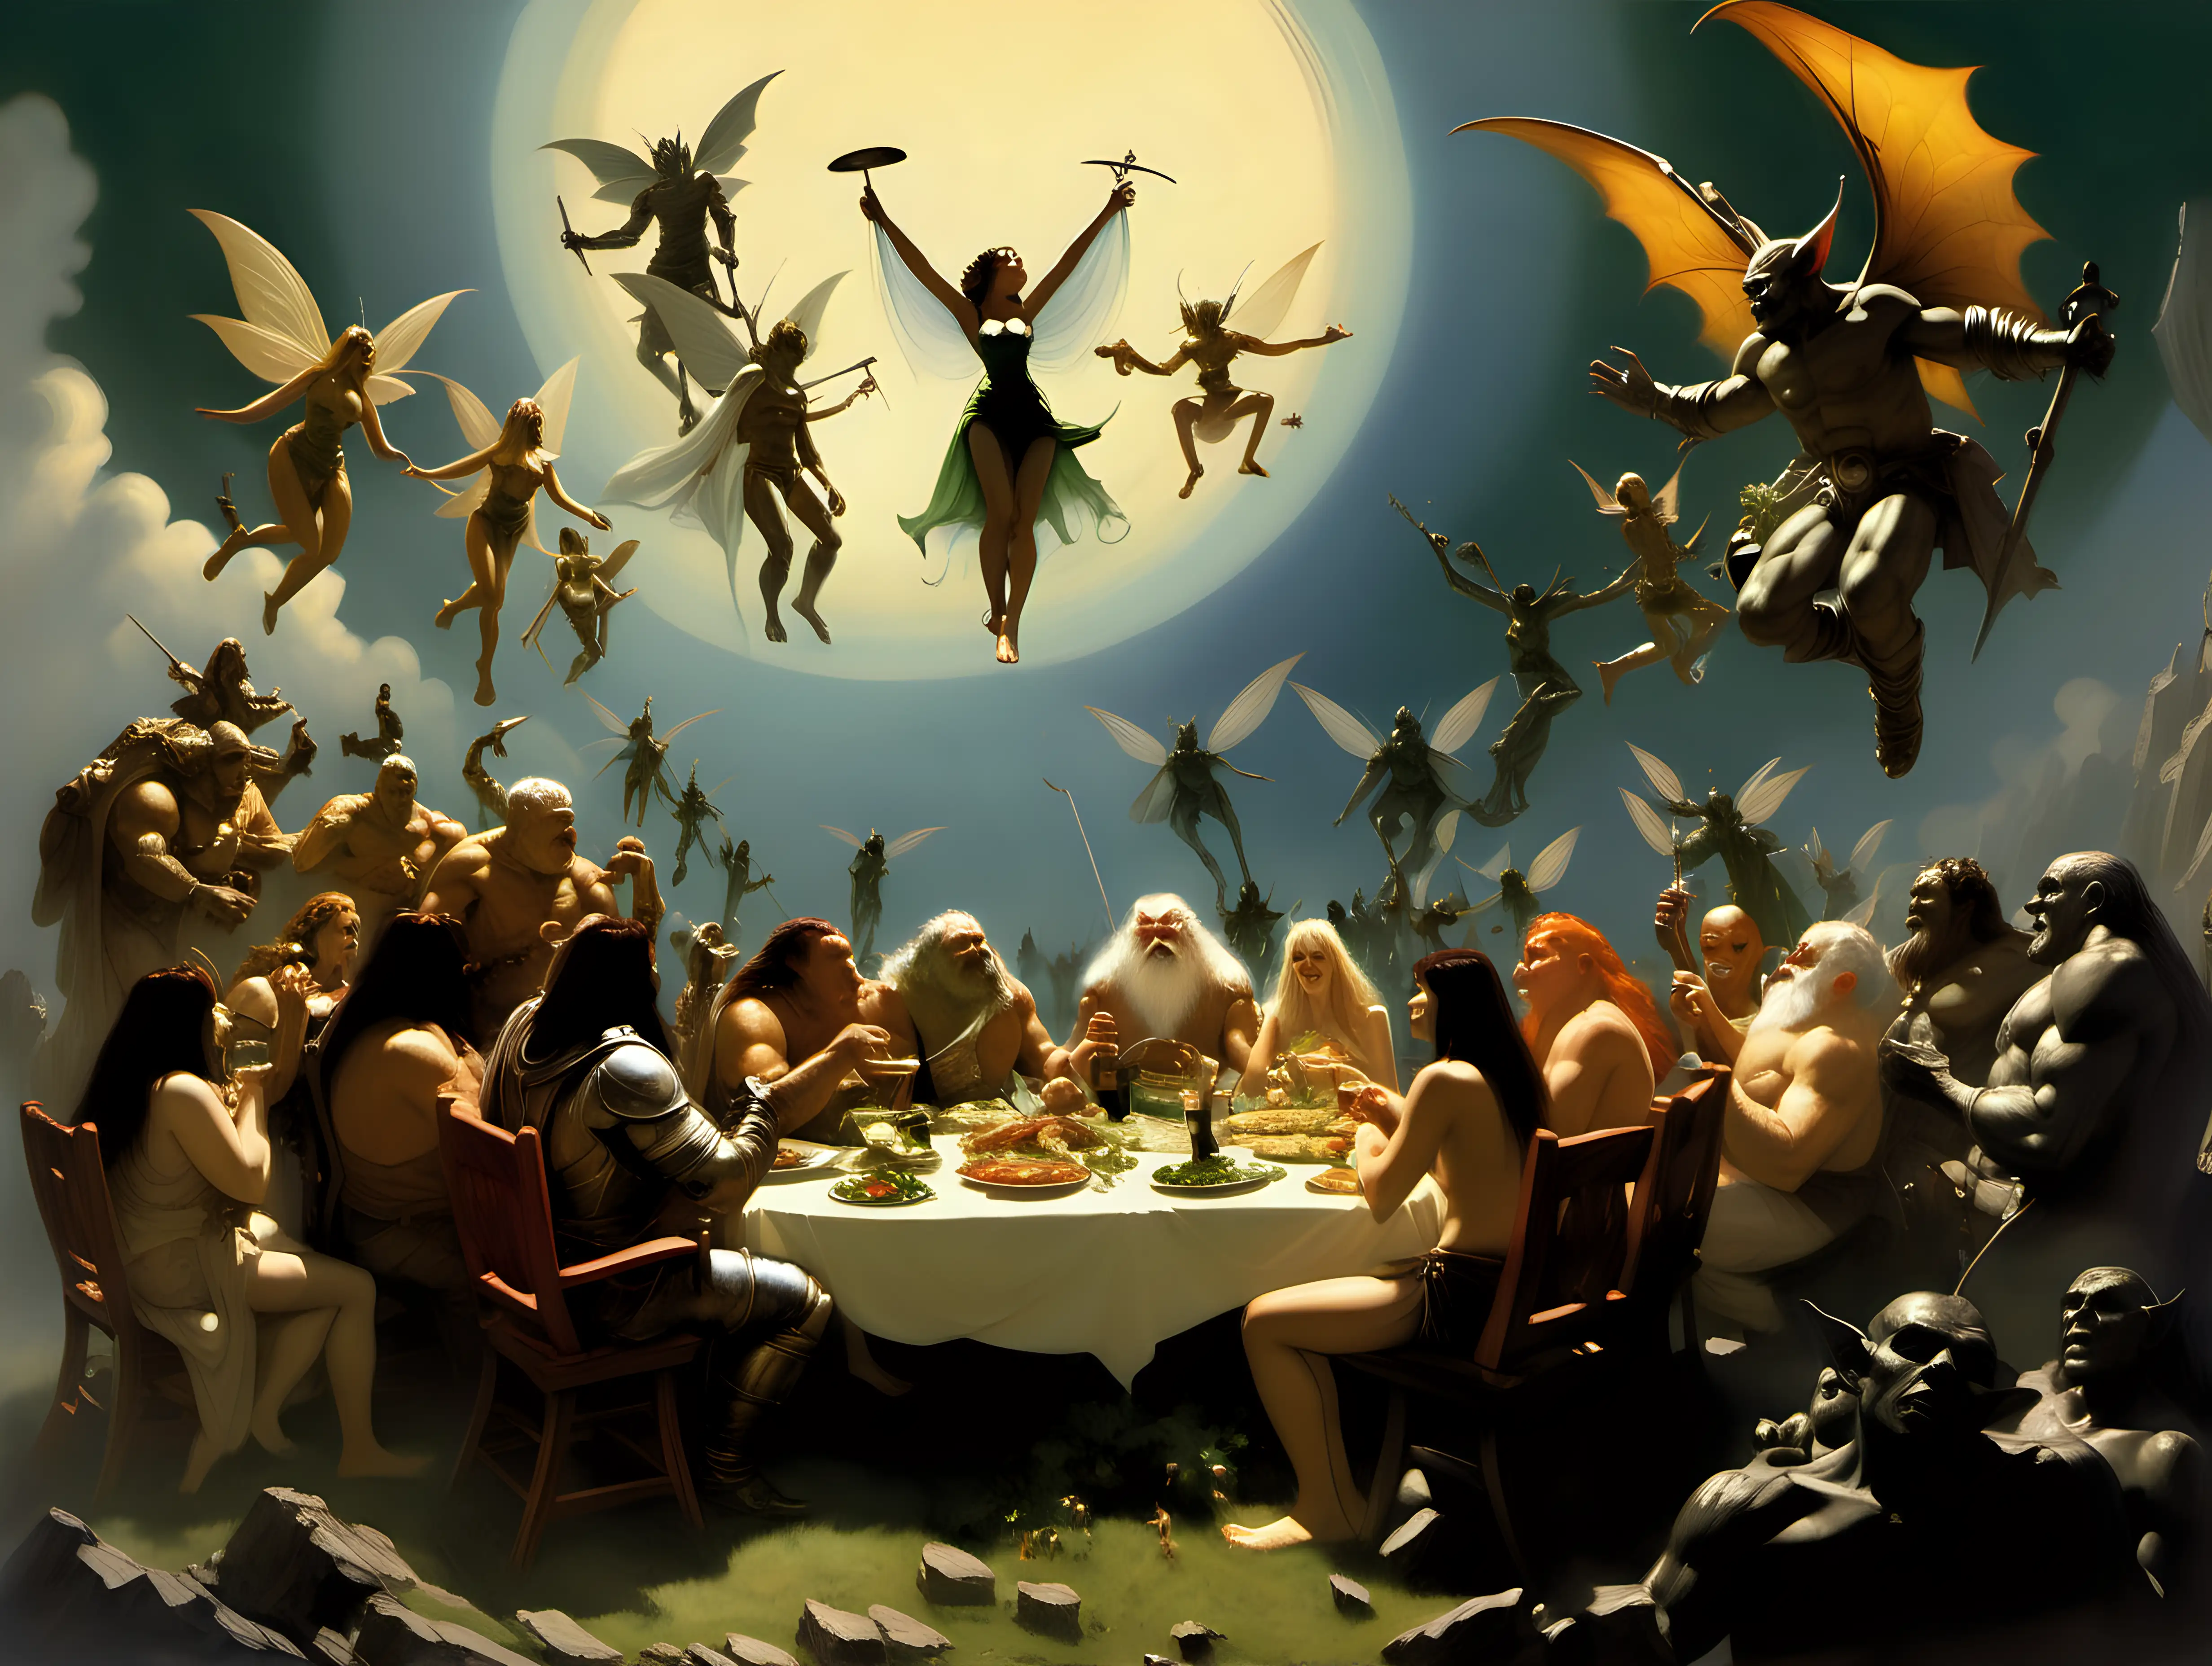 hobbits and giants  and fairies and elves having dinner in Heaven with all the saints Frank Frazetta style